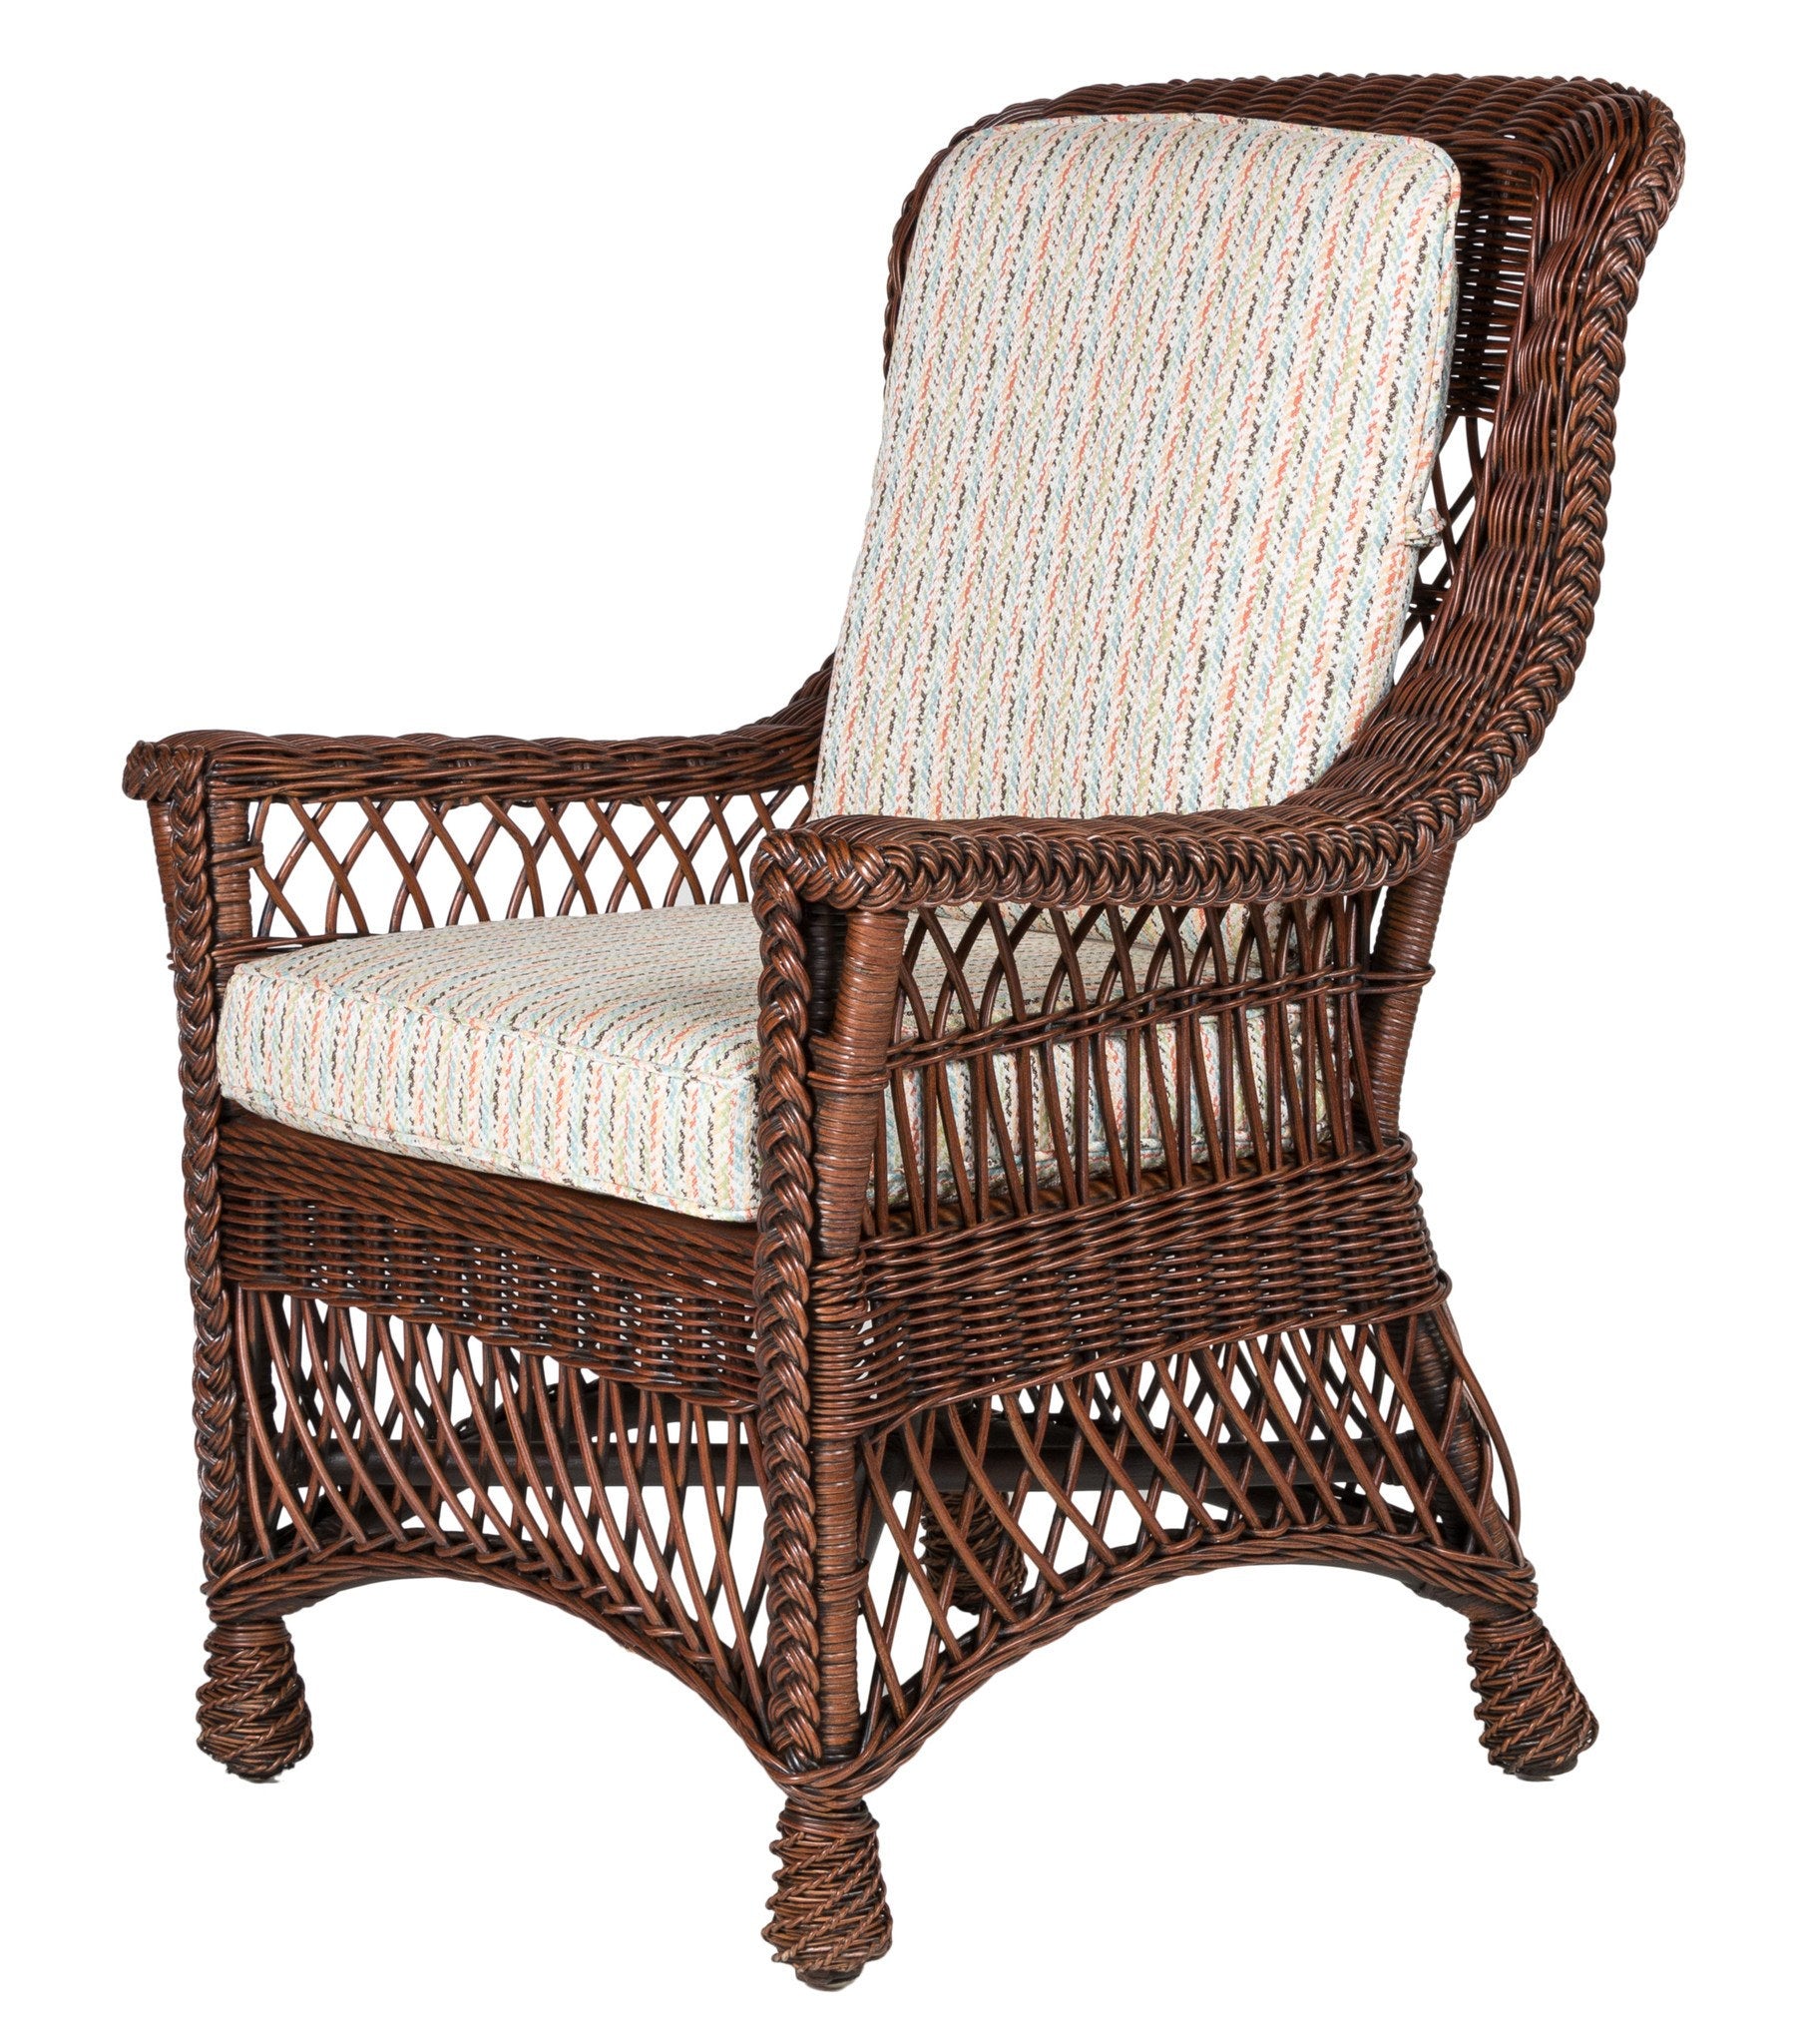 Designer Wicker & Rattan By Tribor Rockport Dining Arm Chair Dining Chair - Rattan Imports